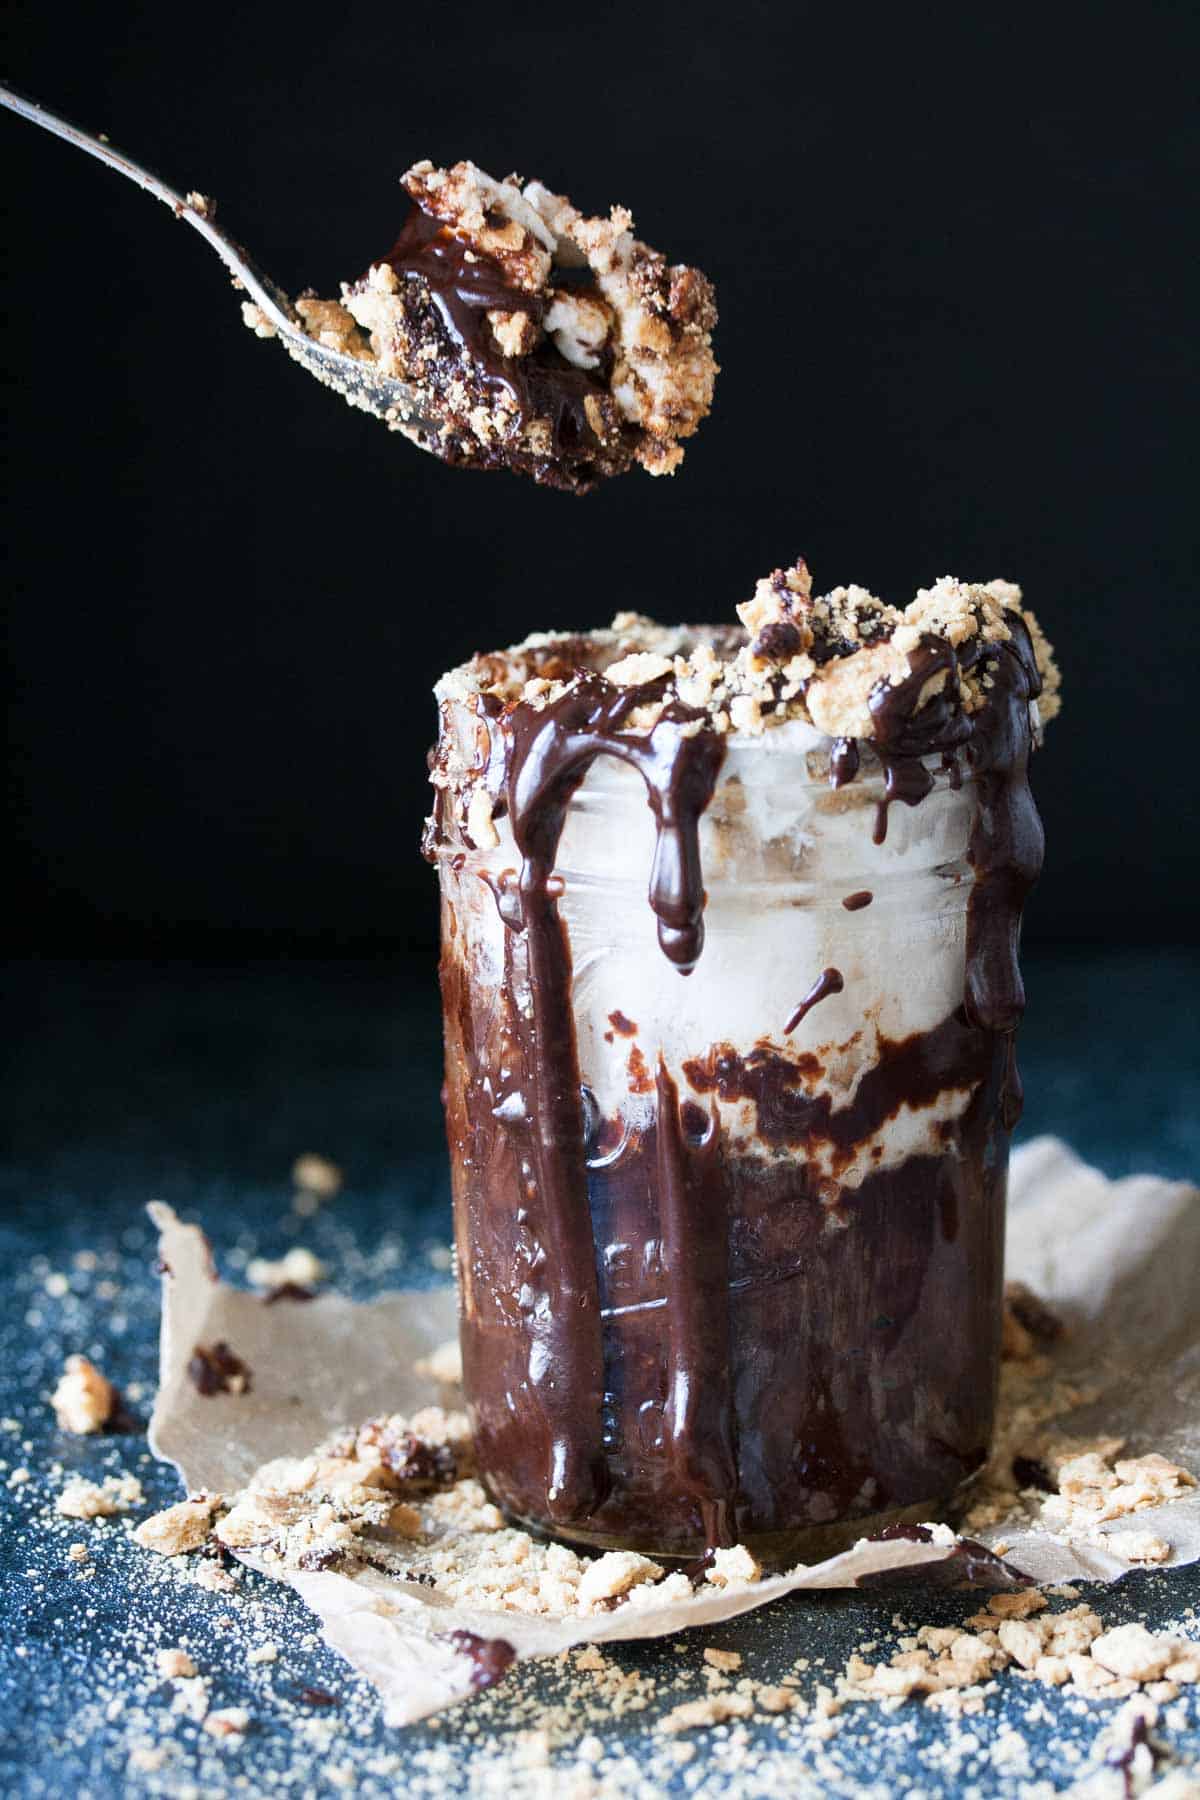 Spoon getting a bite of chocolate cake topped with sauce and toppings from a jar